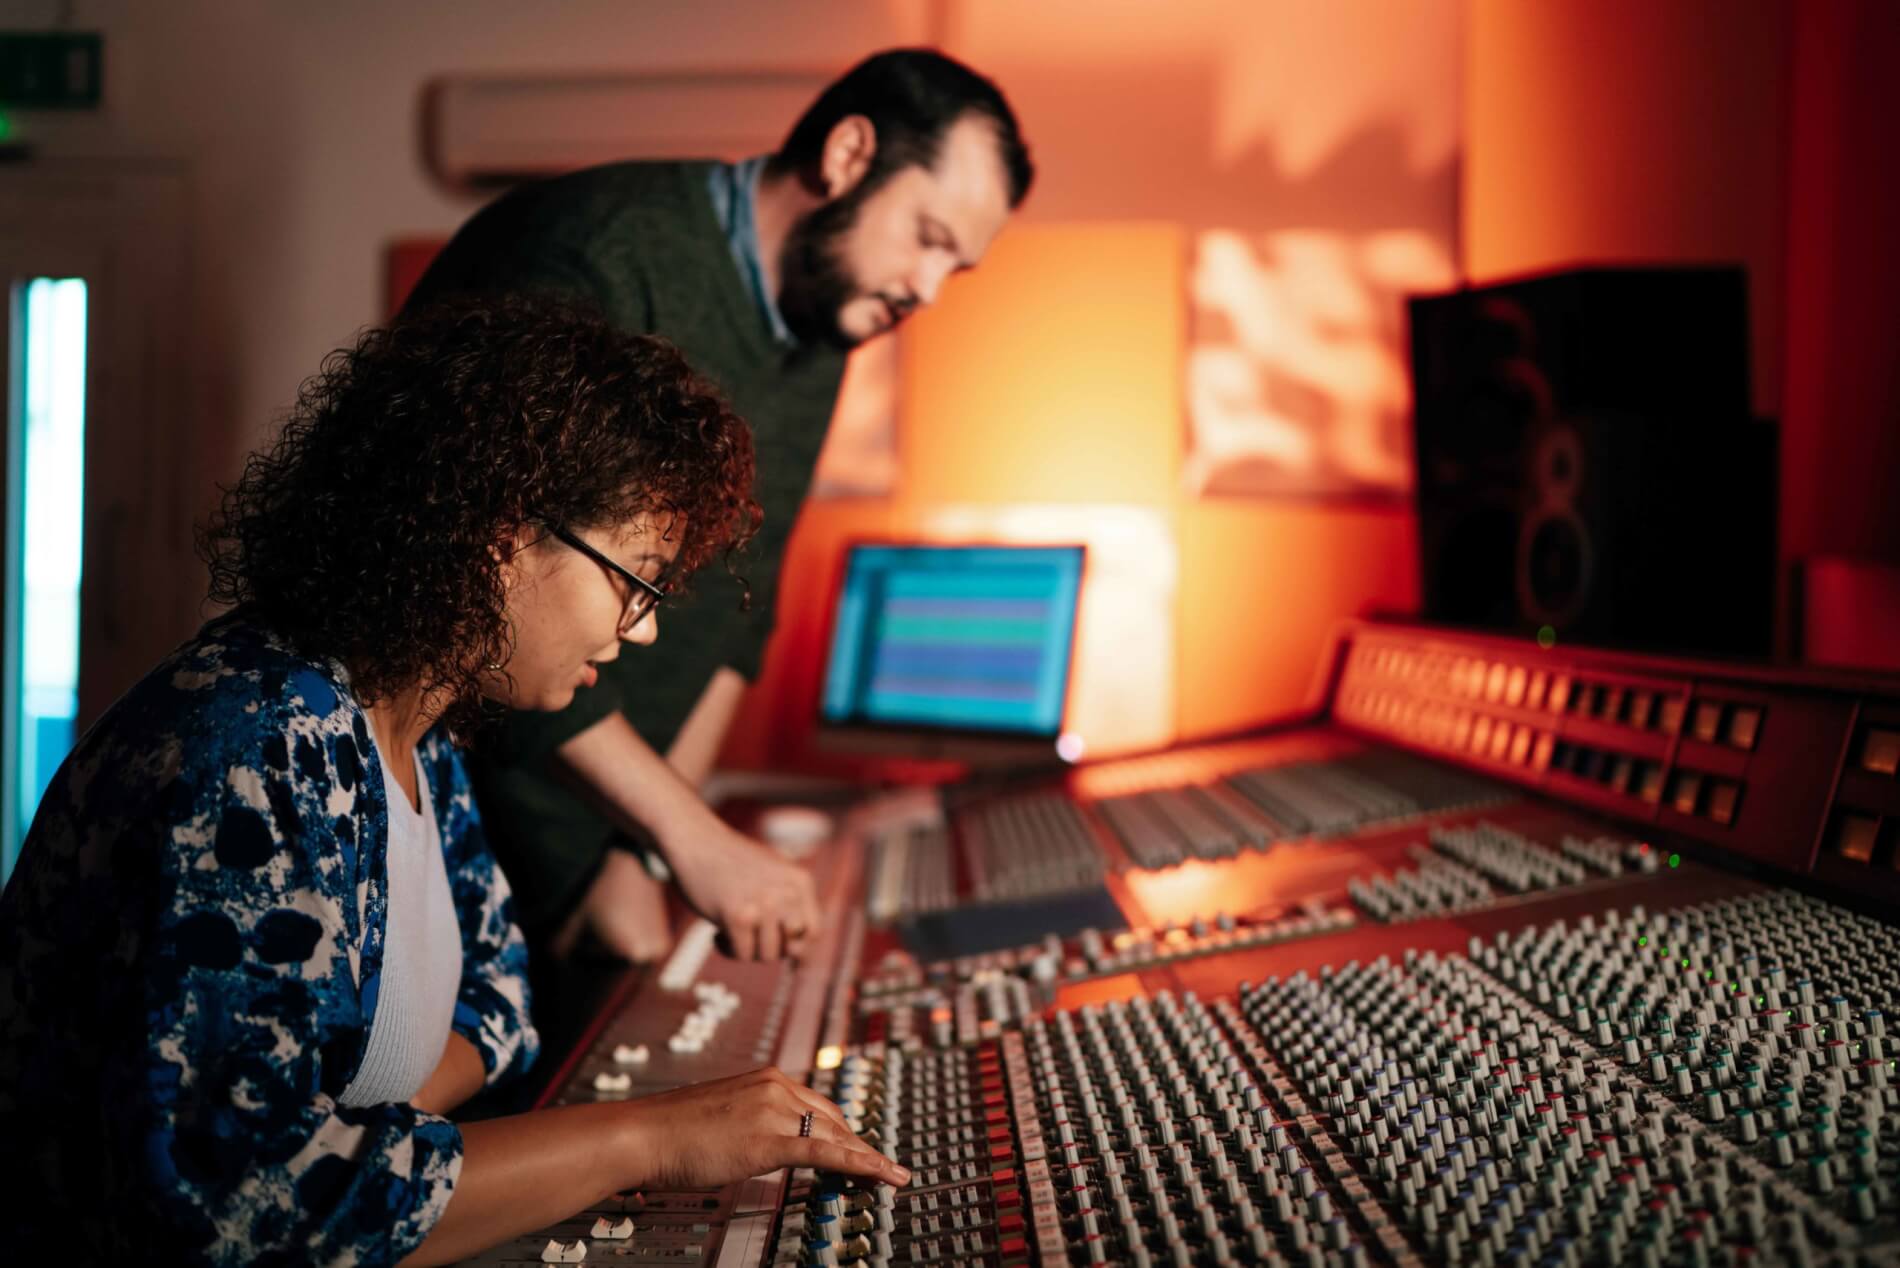 Girl sits at audio mixing analgoue desk with man standing. Both are adjusting levels and knobs.